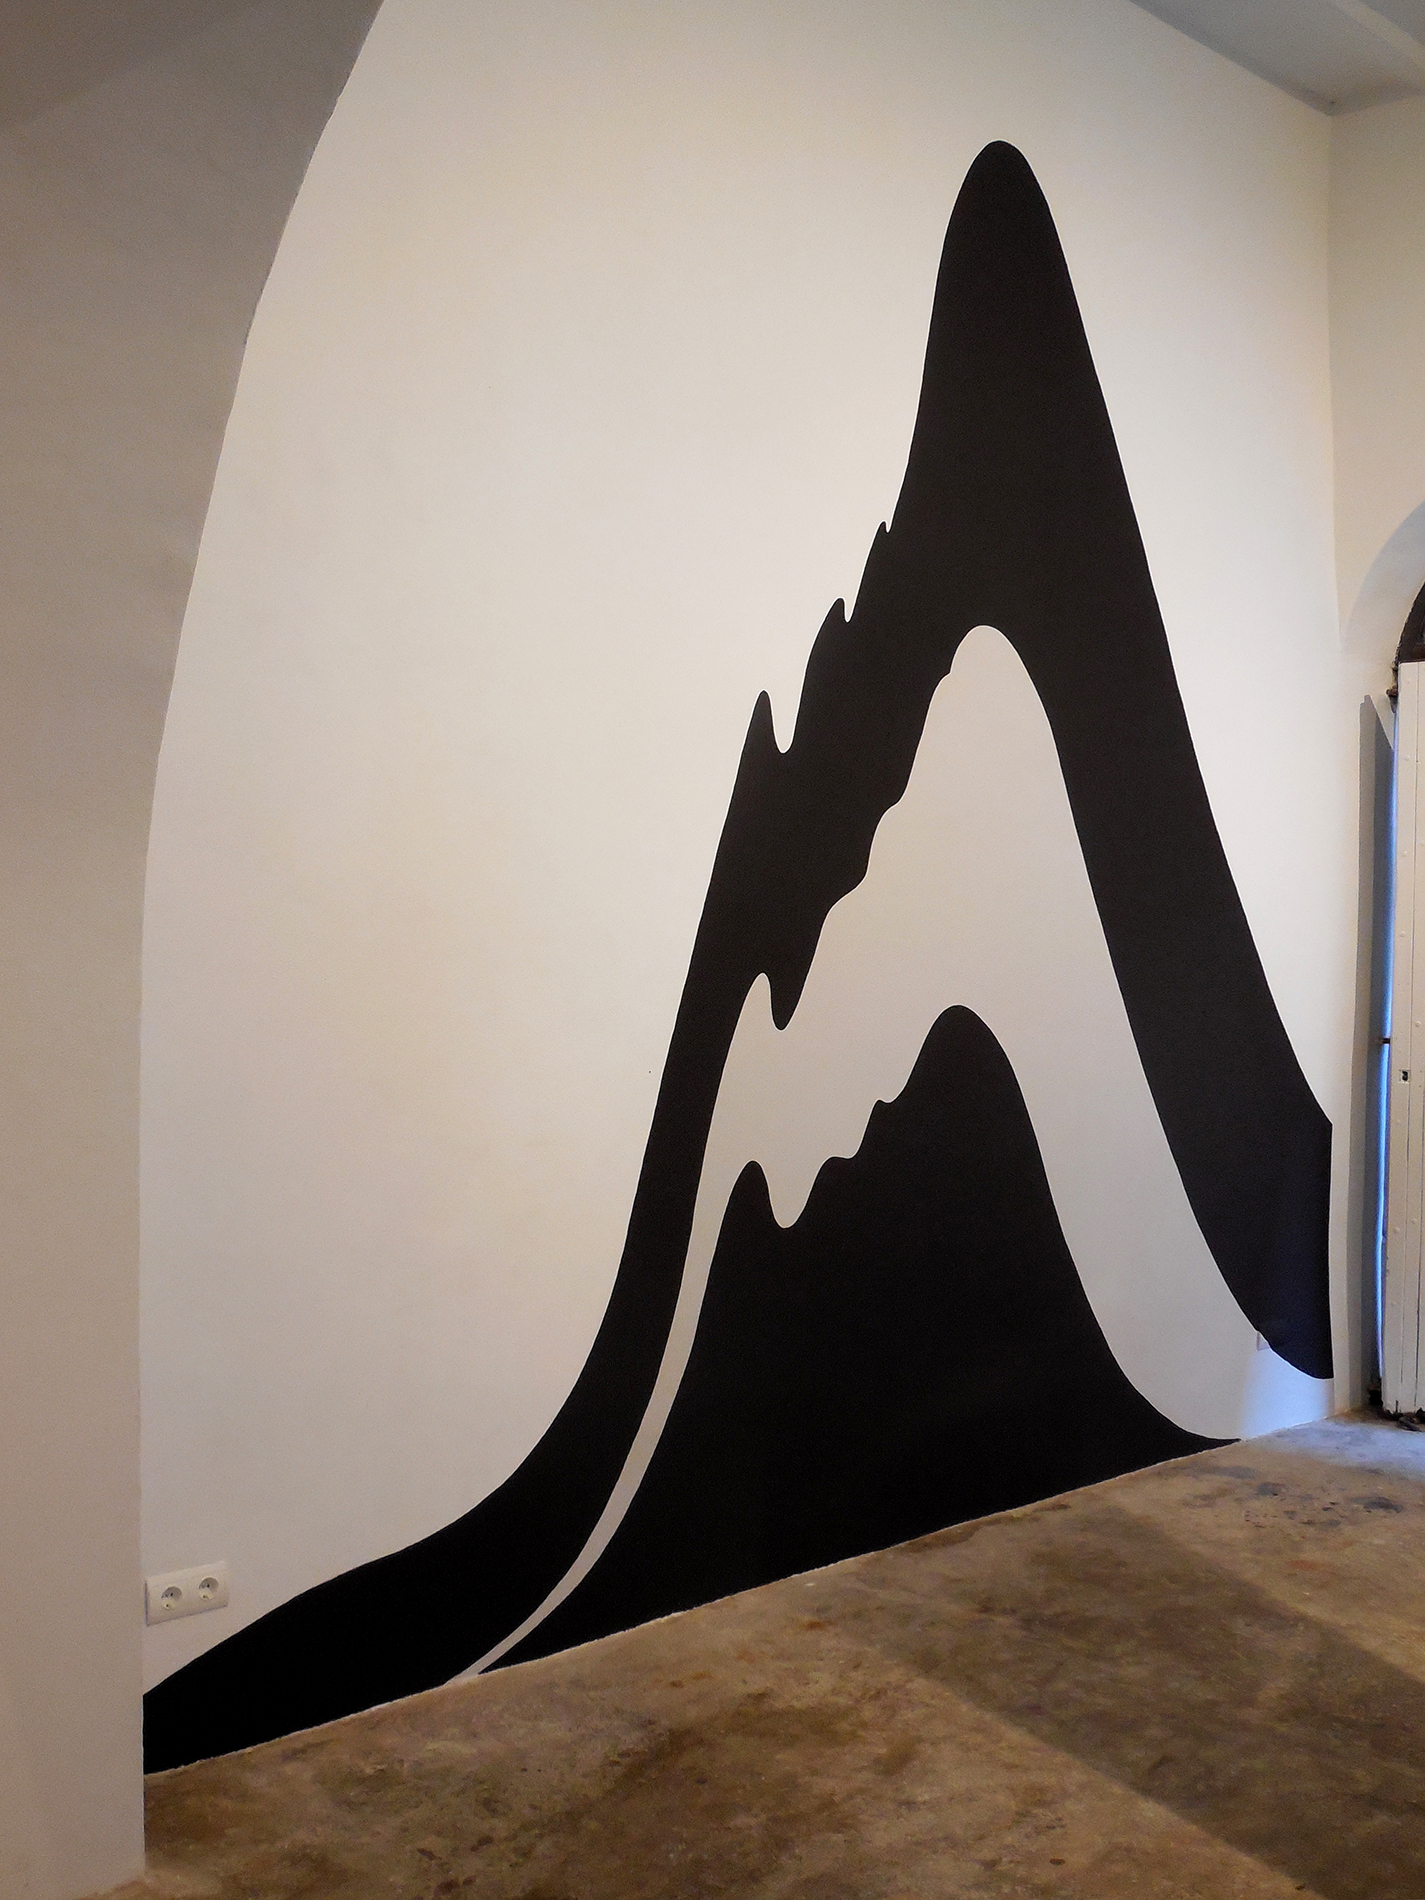 «Hubbert curve. Production of oil, gas and coal from 1900 to 2096 », Ecological painting on wall, 475 x 425 cm, ©PSJM2015